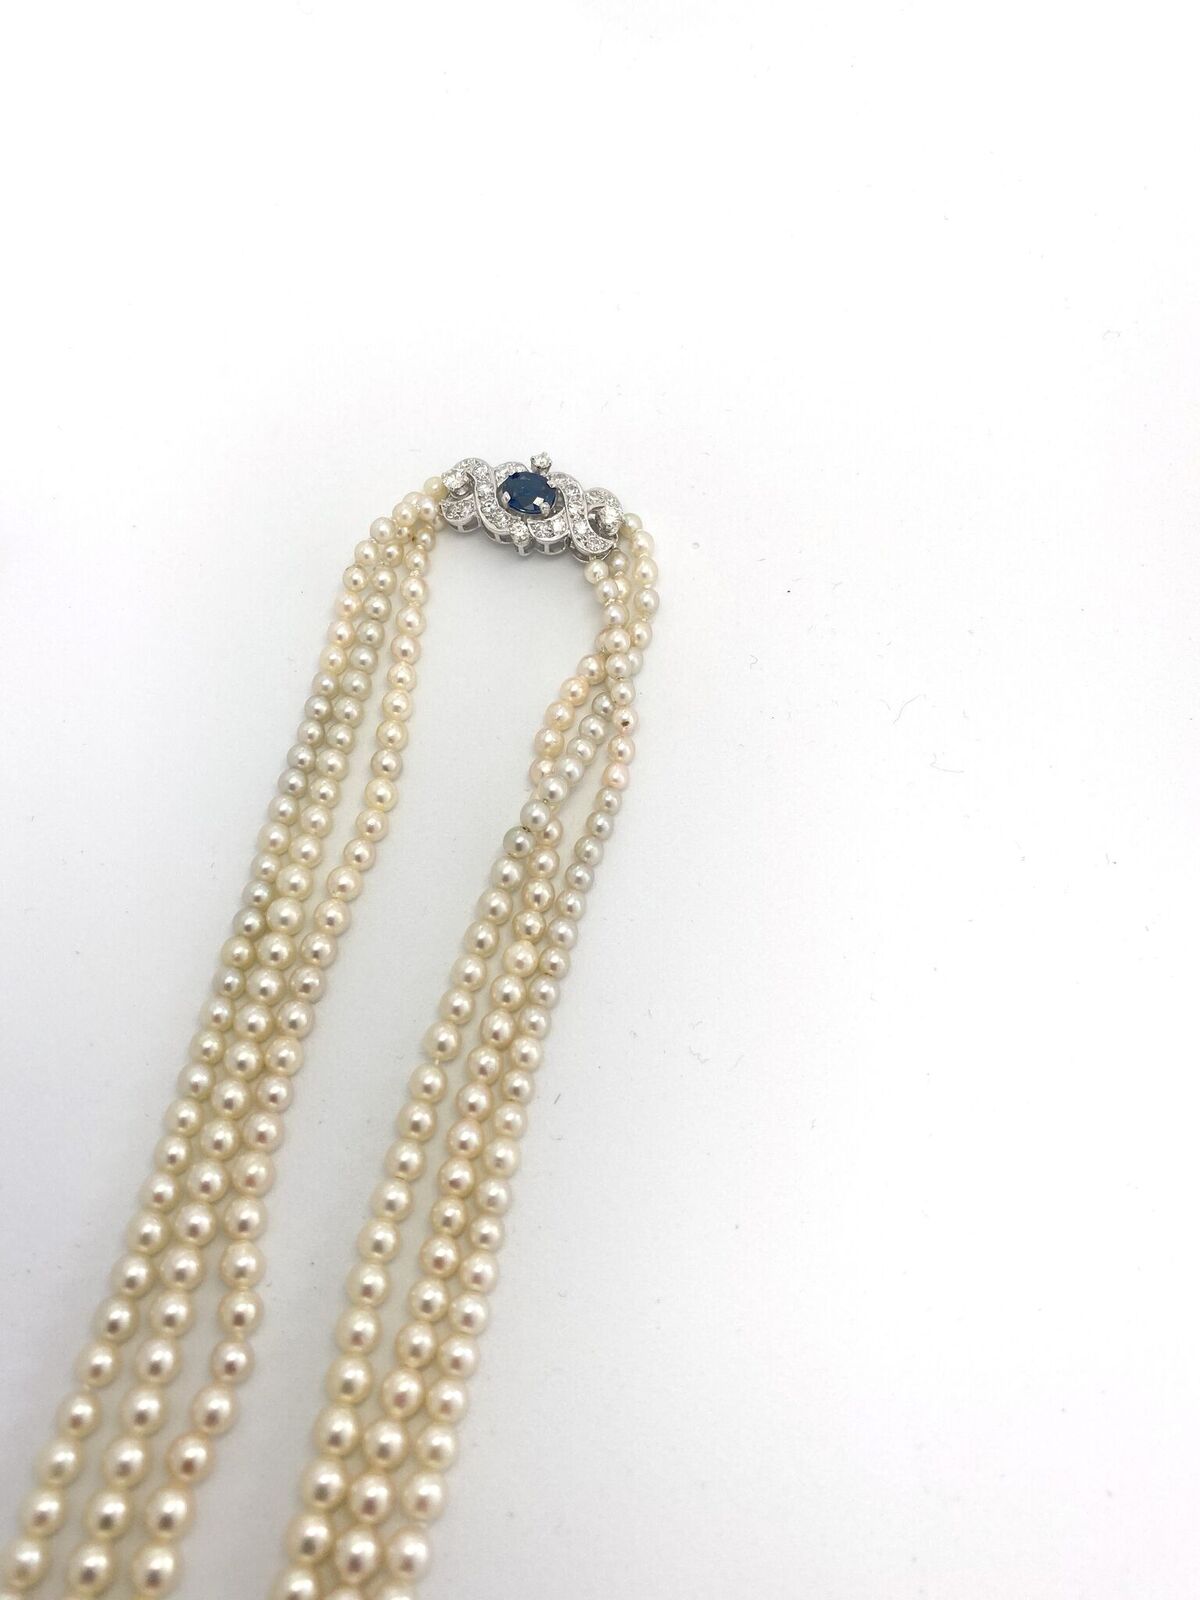 Triple Row Pearl Necklace with Sapphire and Diamond Clasp, three graduating rows of high quality - Image 4 of 4